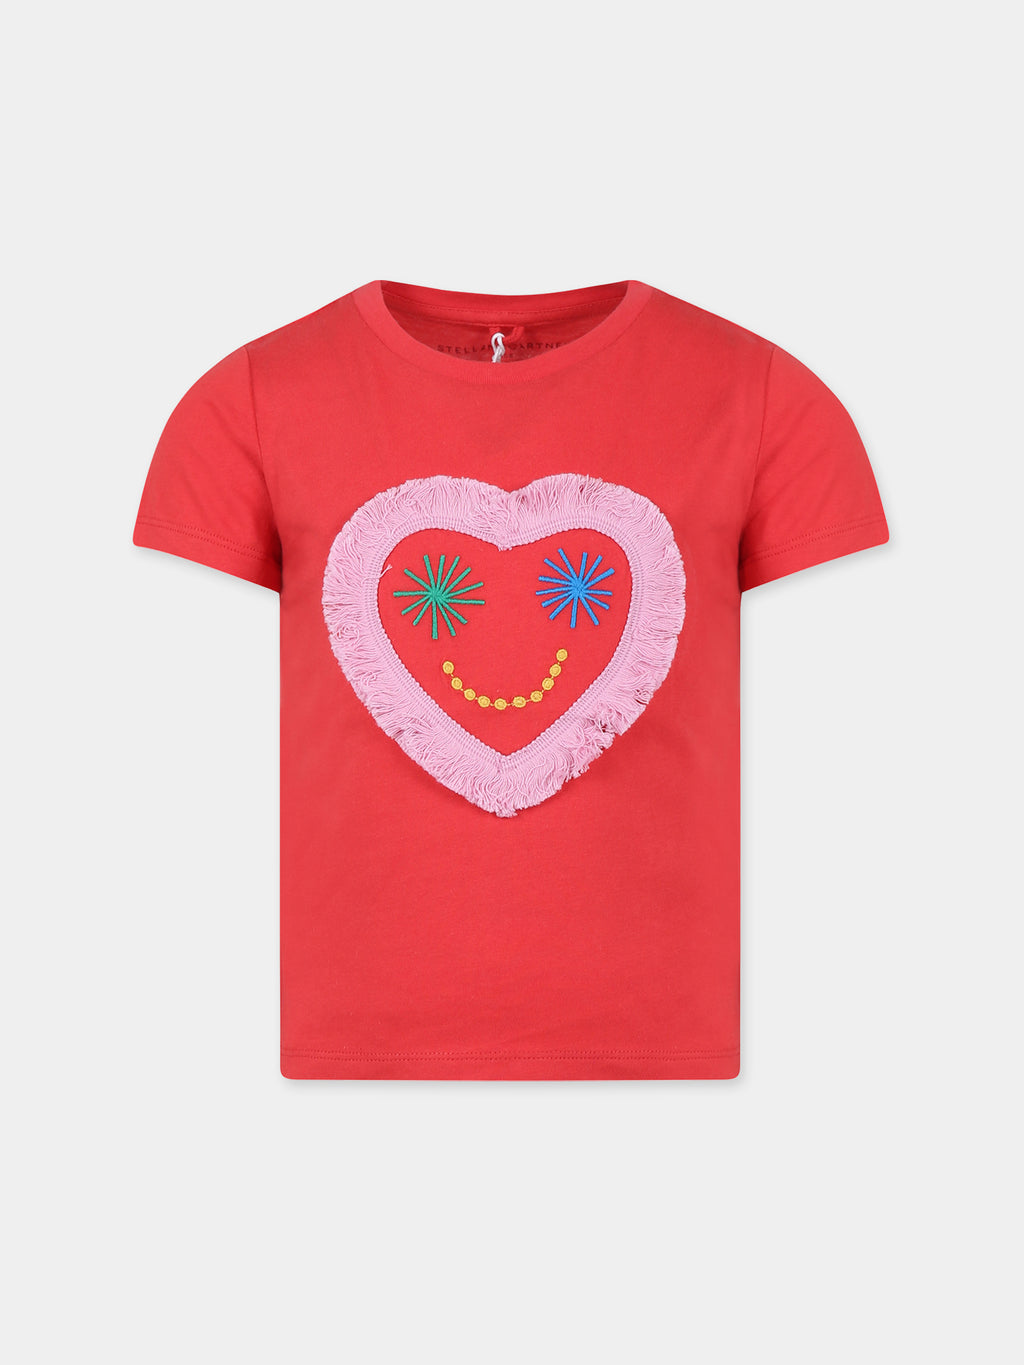 Red t-shirt for girl with heart